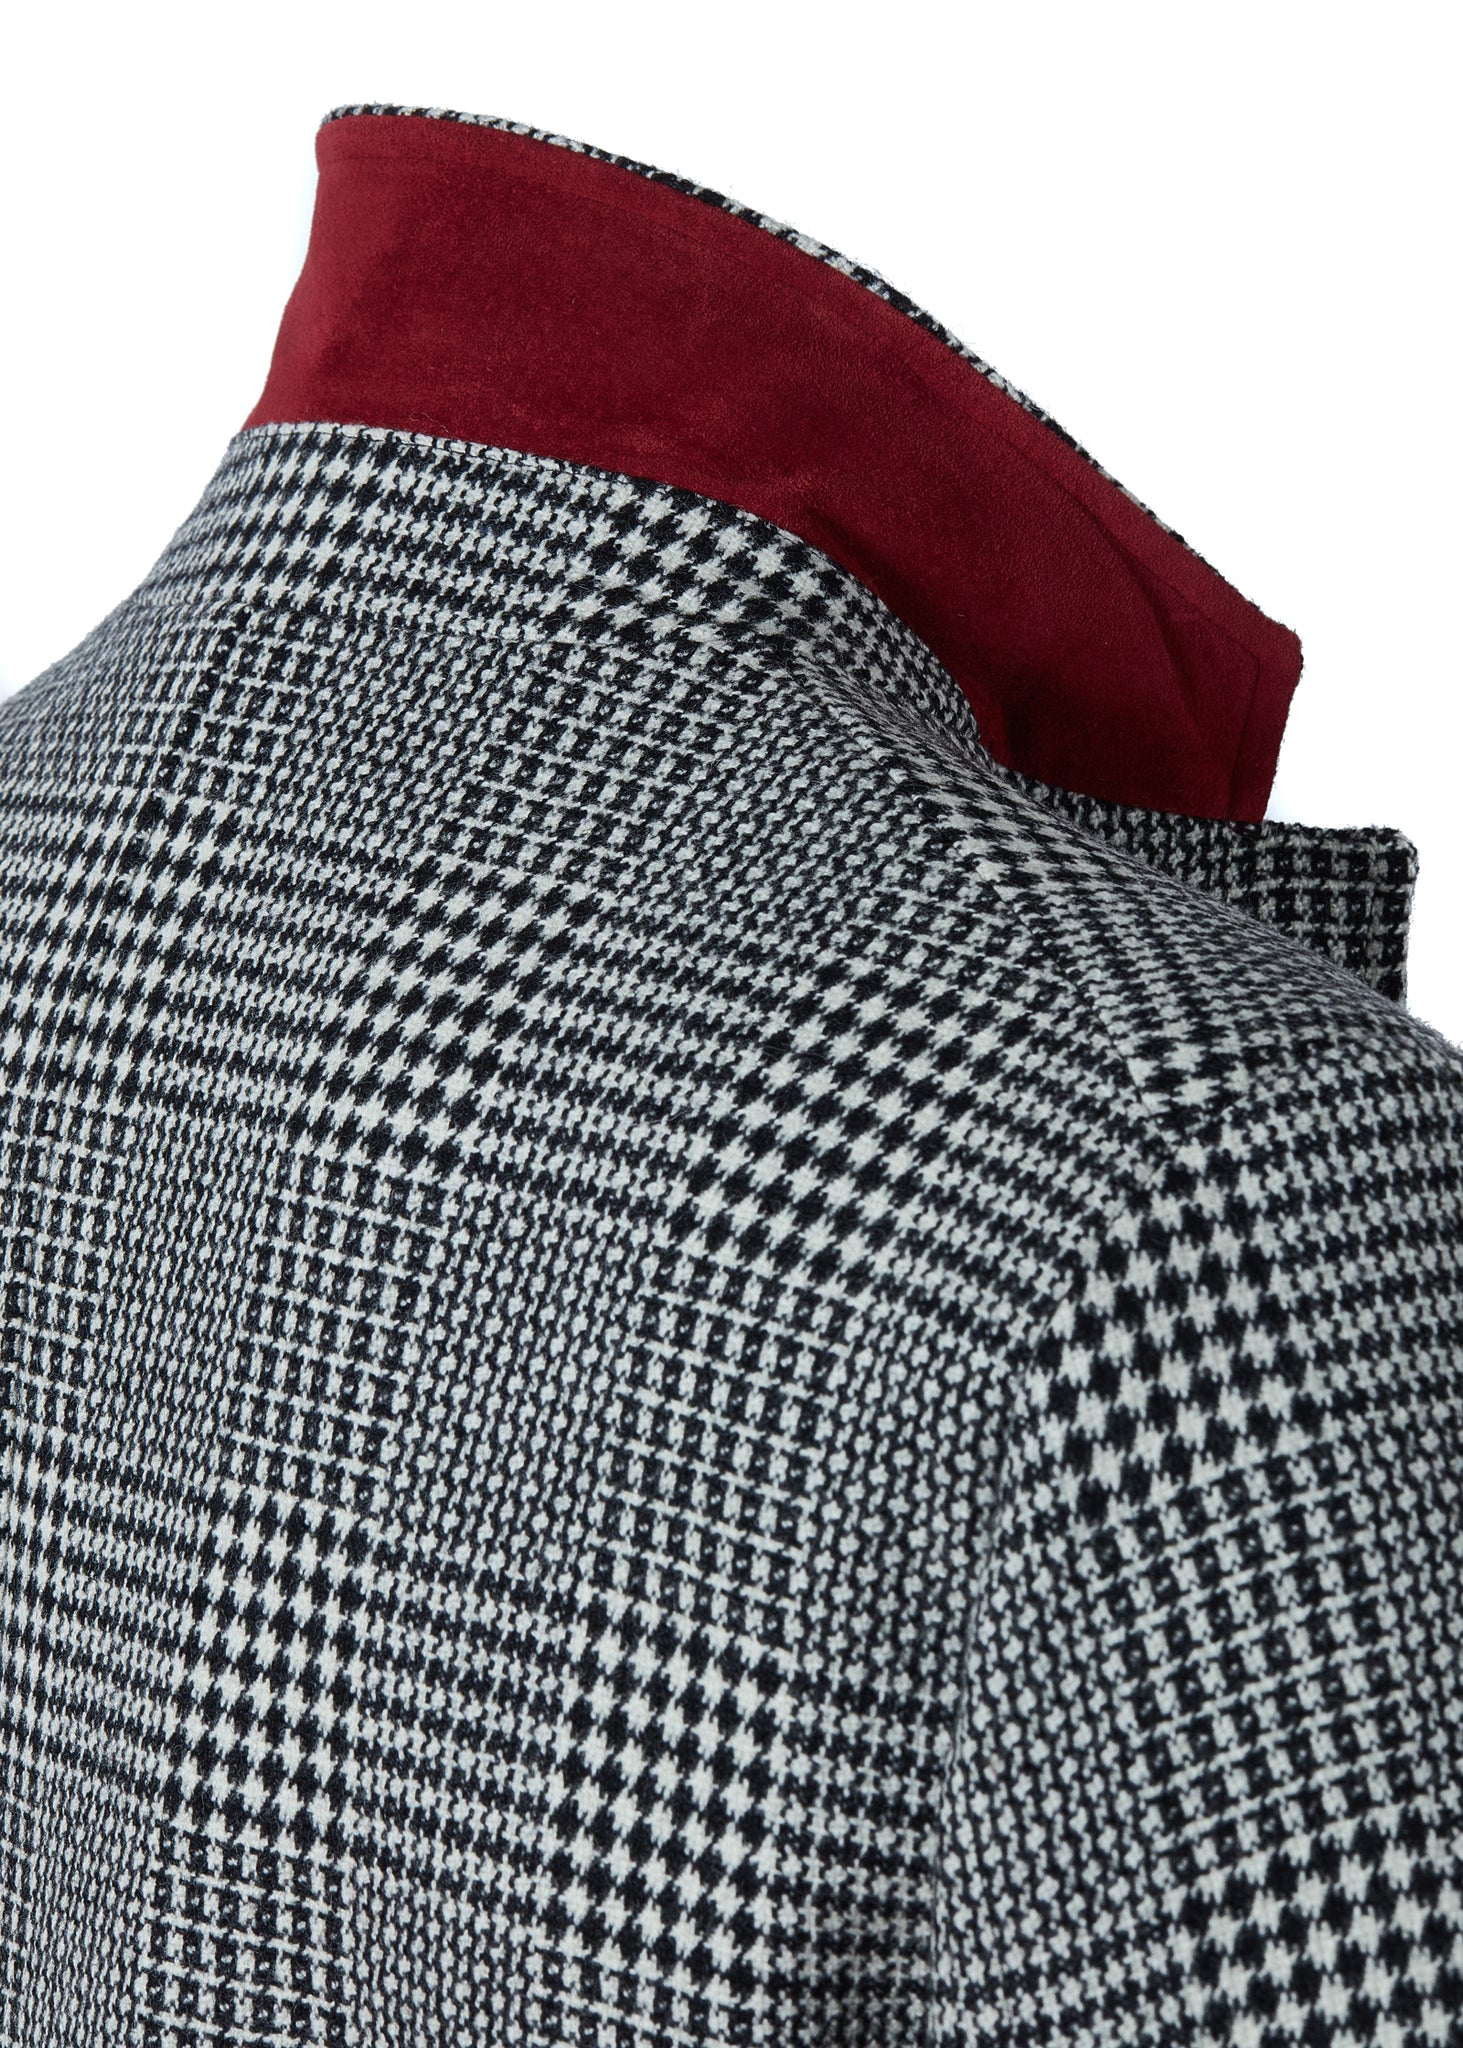 Black and white tweed mens coat with collar popped to show red under collar